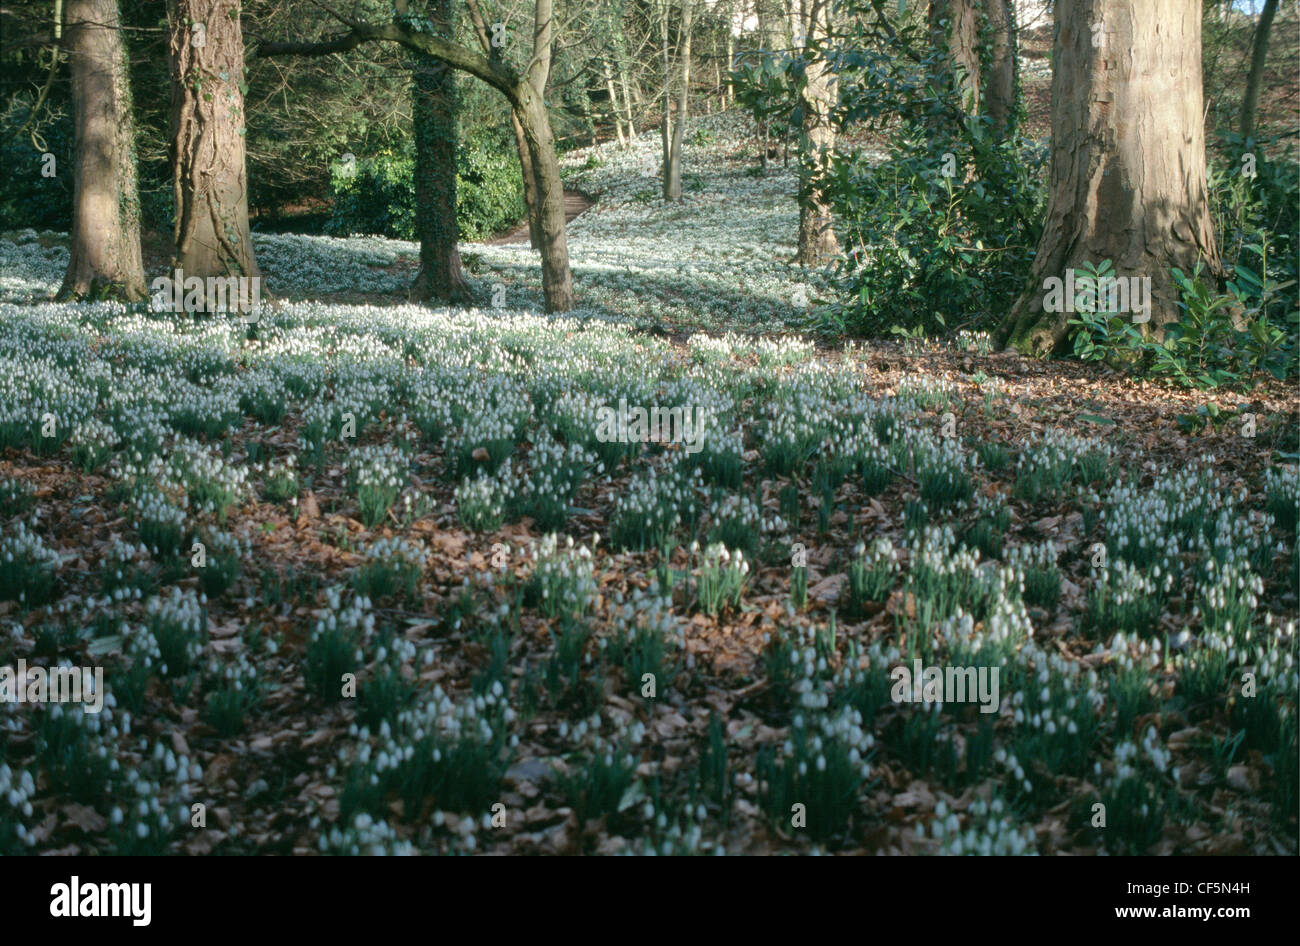 Flurries of Snowdrops The British native snowdrop (Galanthus nivalis) grows wild across the countryside Carpet of snowdrops Stock Photo